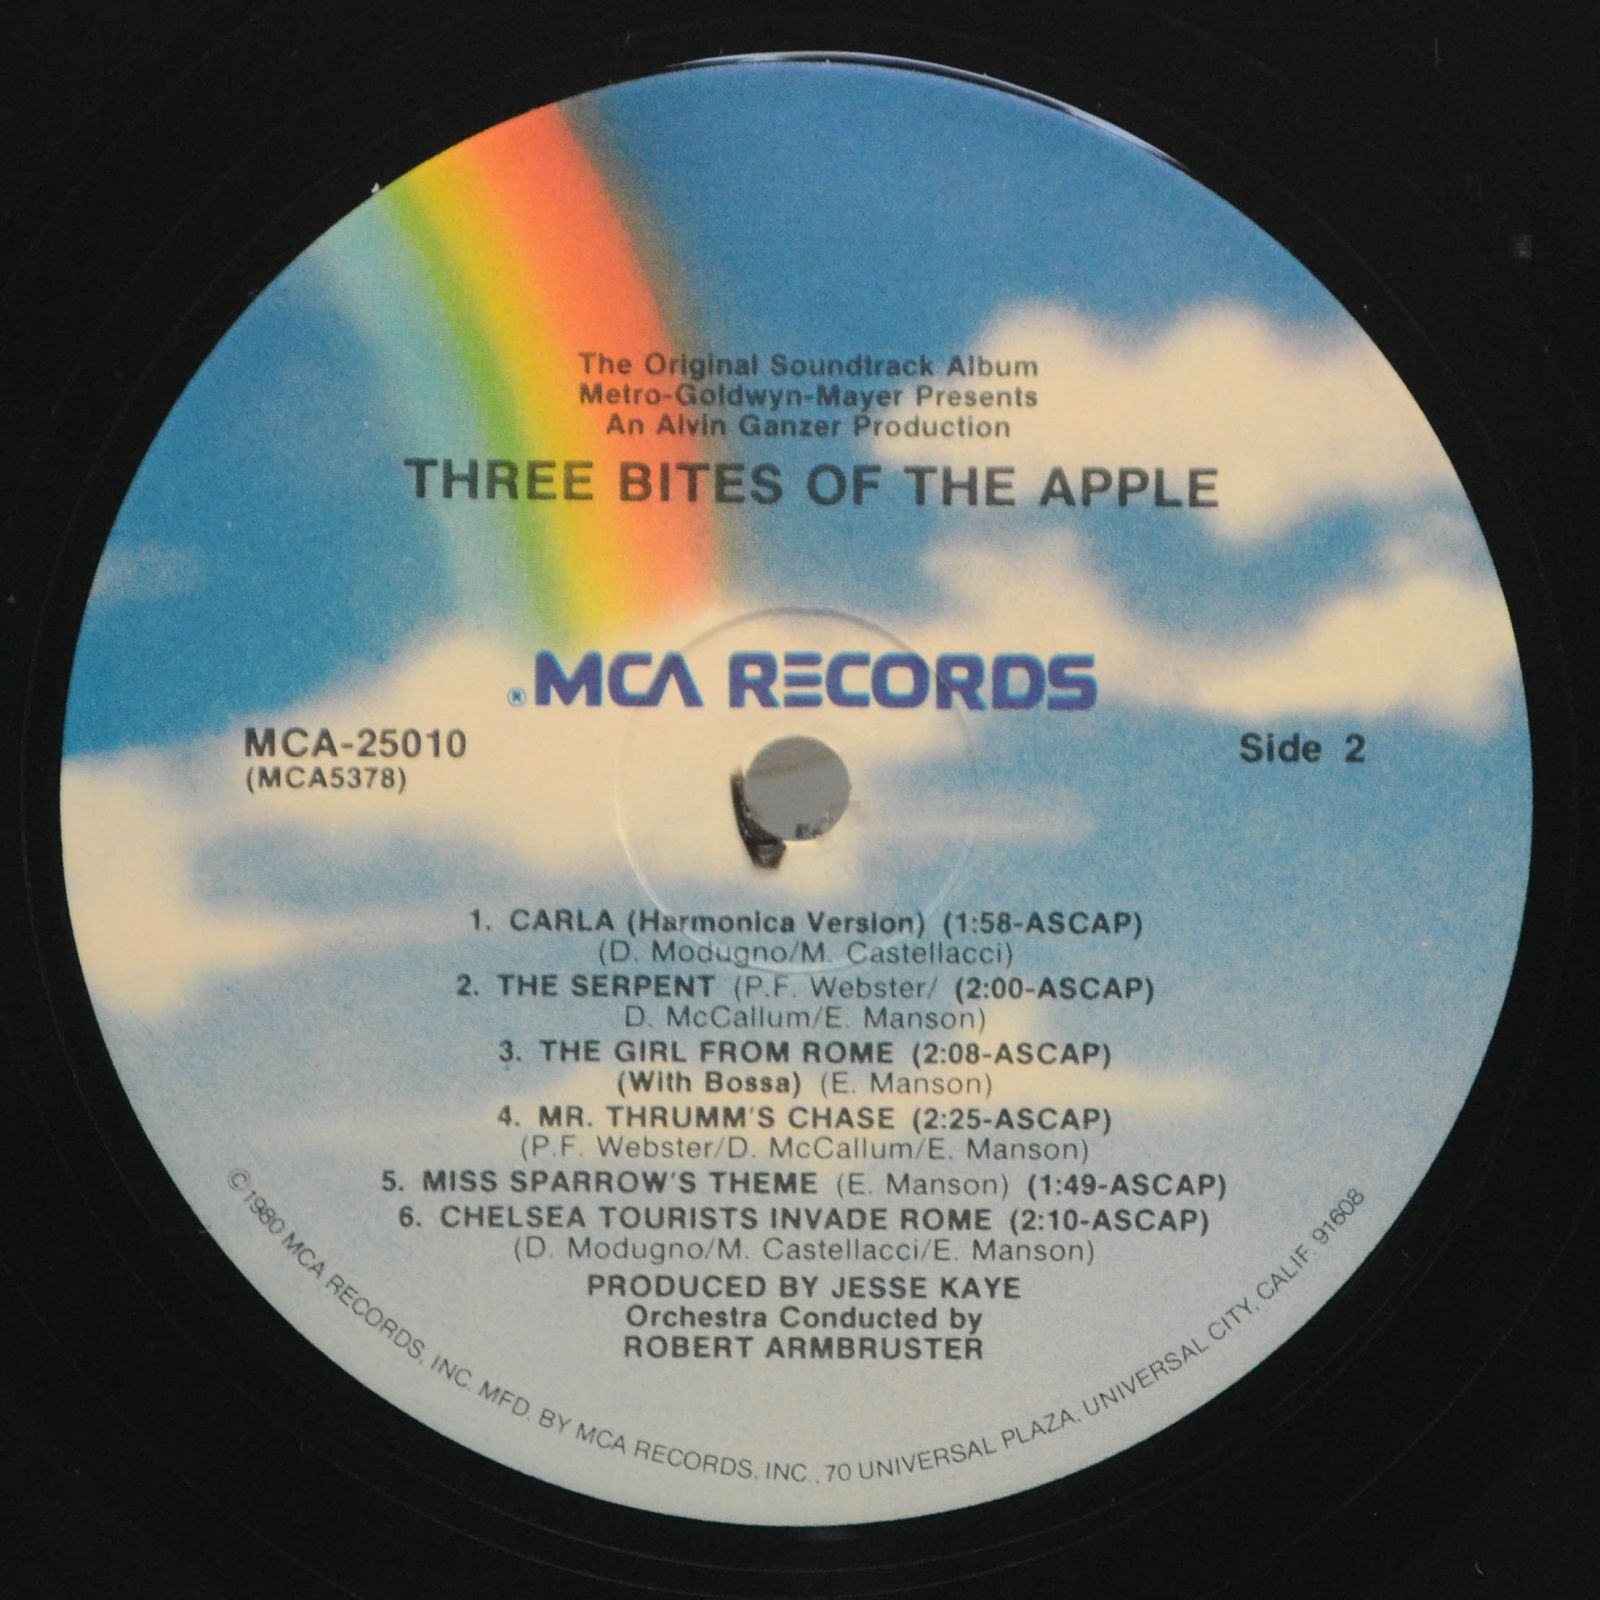 MGM Studio Orchestra Conducted By Robert Armbruster — Three Bites Of The Apple (The Original Sound Track Album), 1986